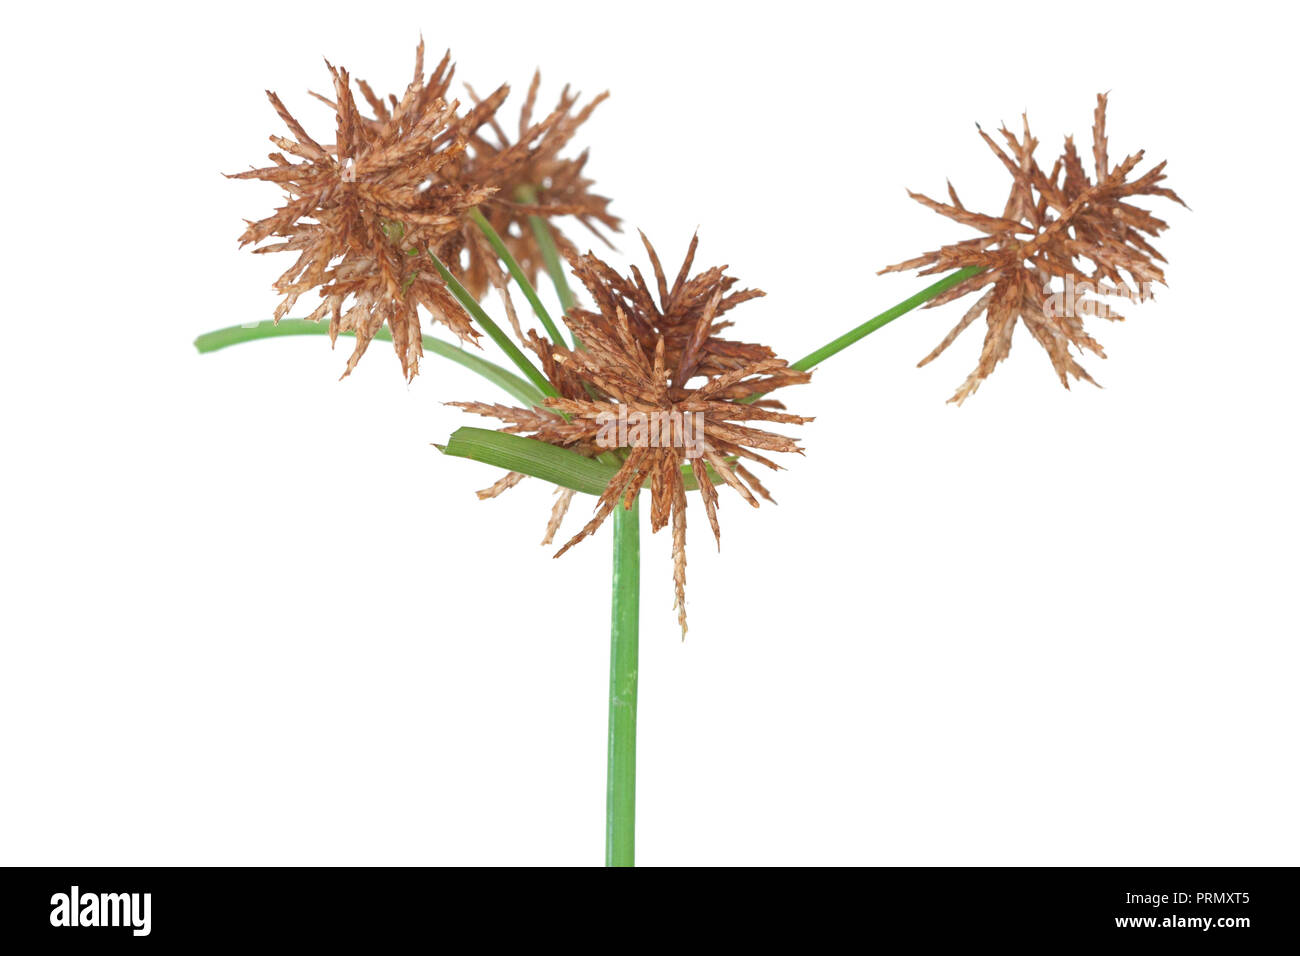 The brown seeds of a nutsedge weed are ready to drop. The wildflower is on a white background. Stock Photo